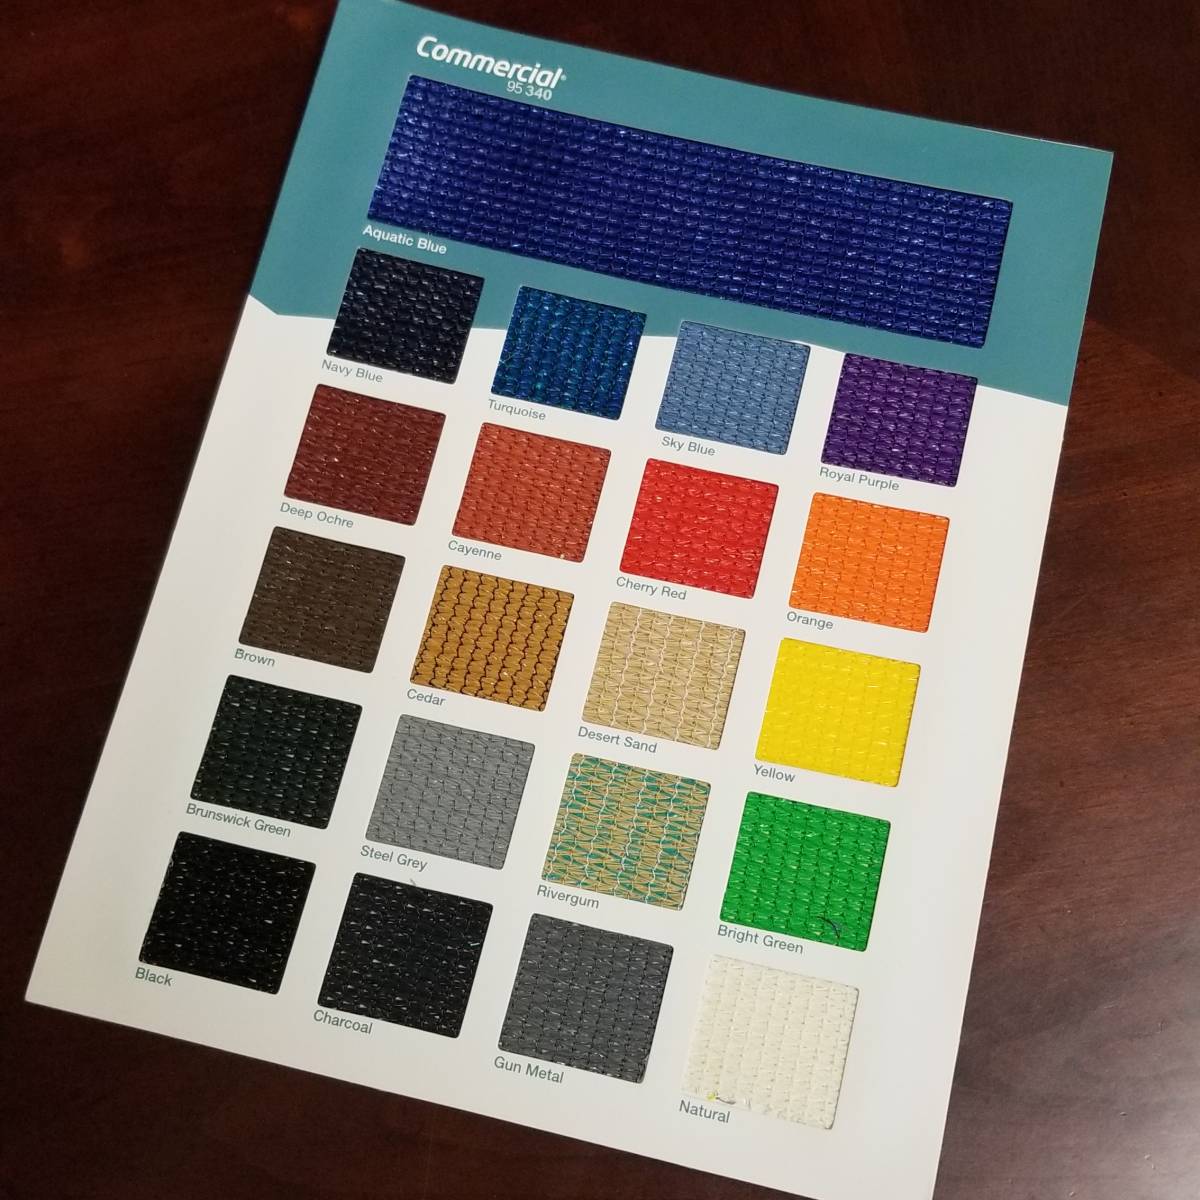 Commercial 95 Samples Shade Cloth Fabric Swatch Book - 2020